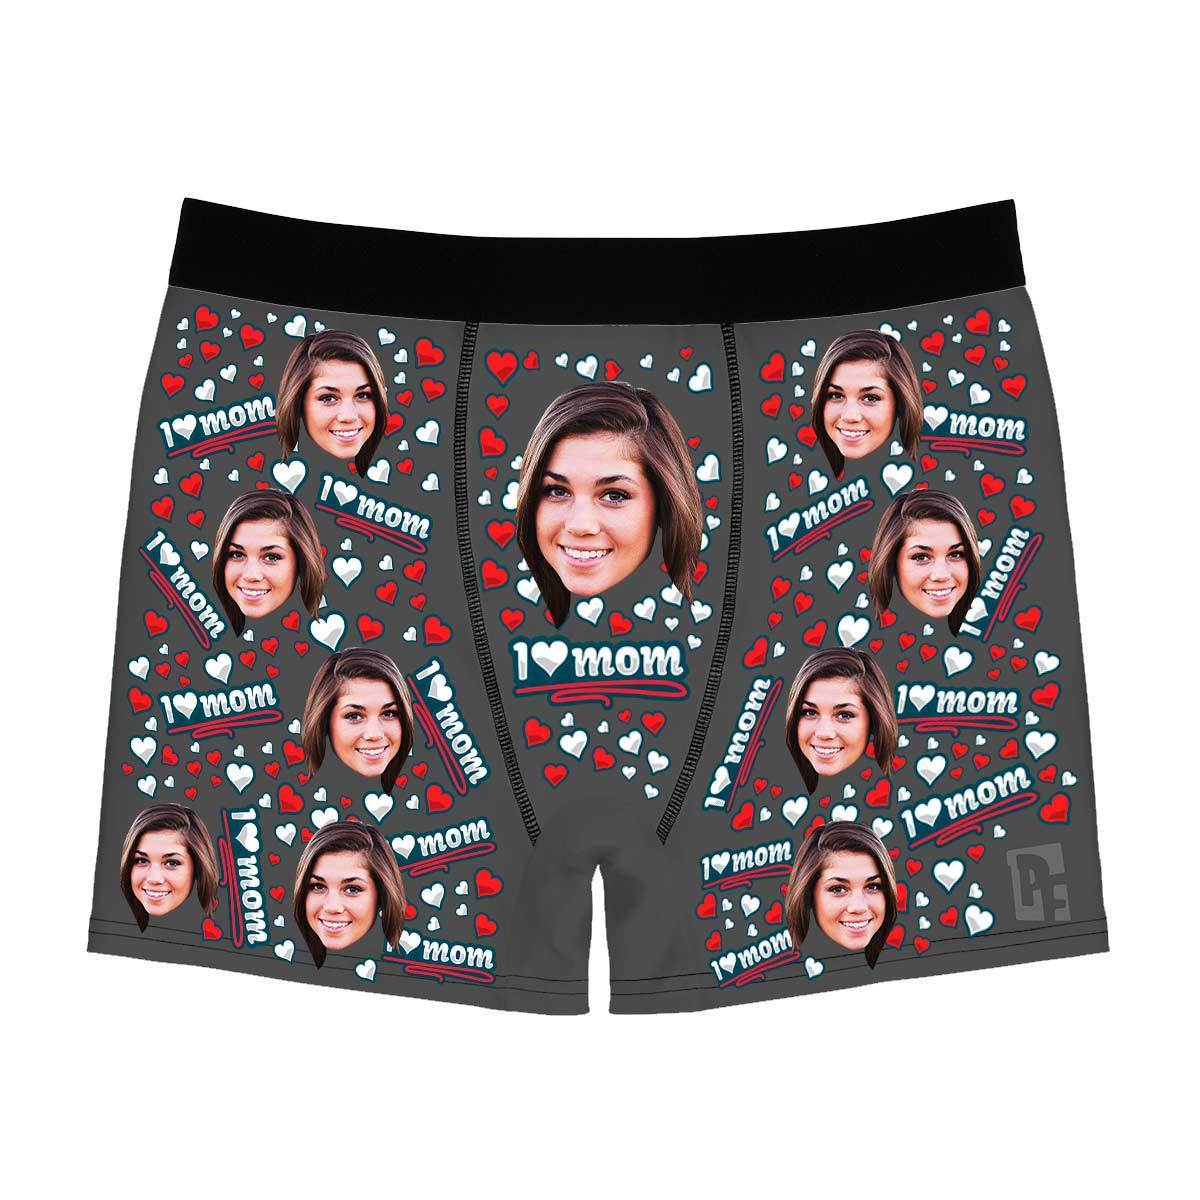 Dark Love mom men's boxer briefs personalized with photo printed on them